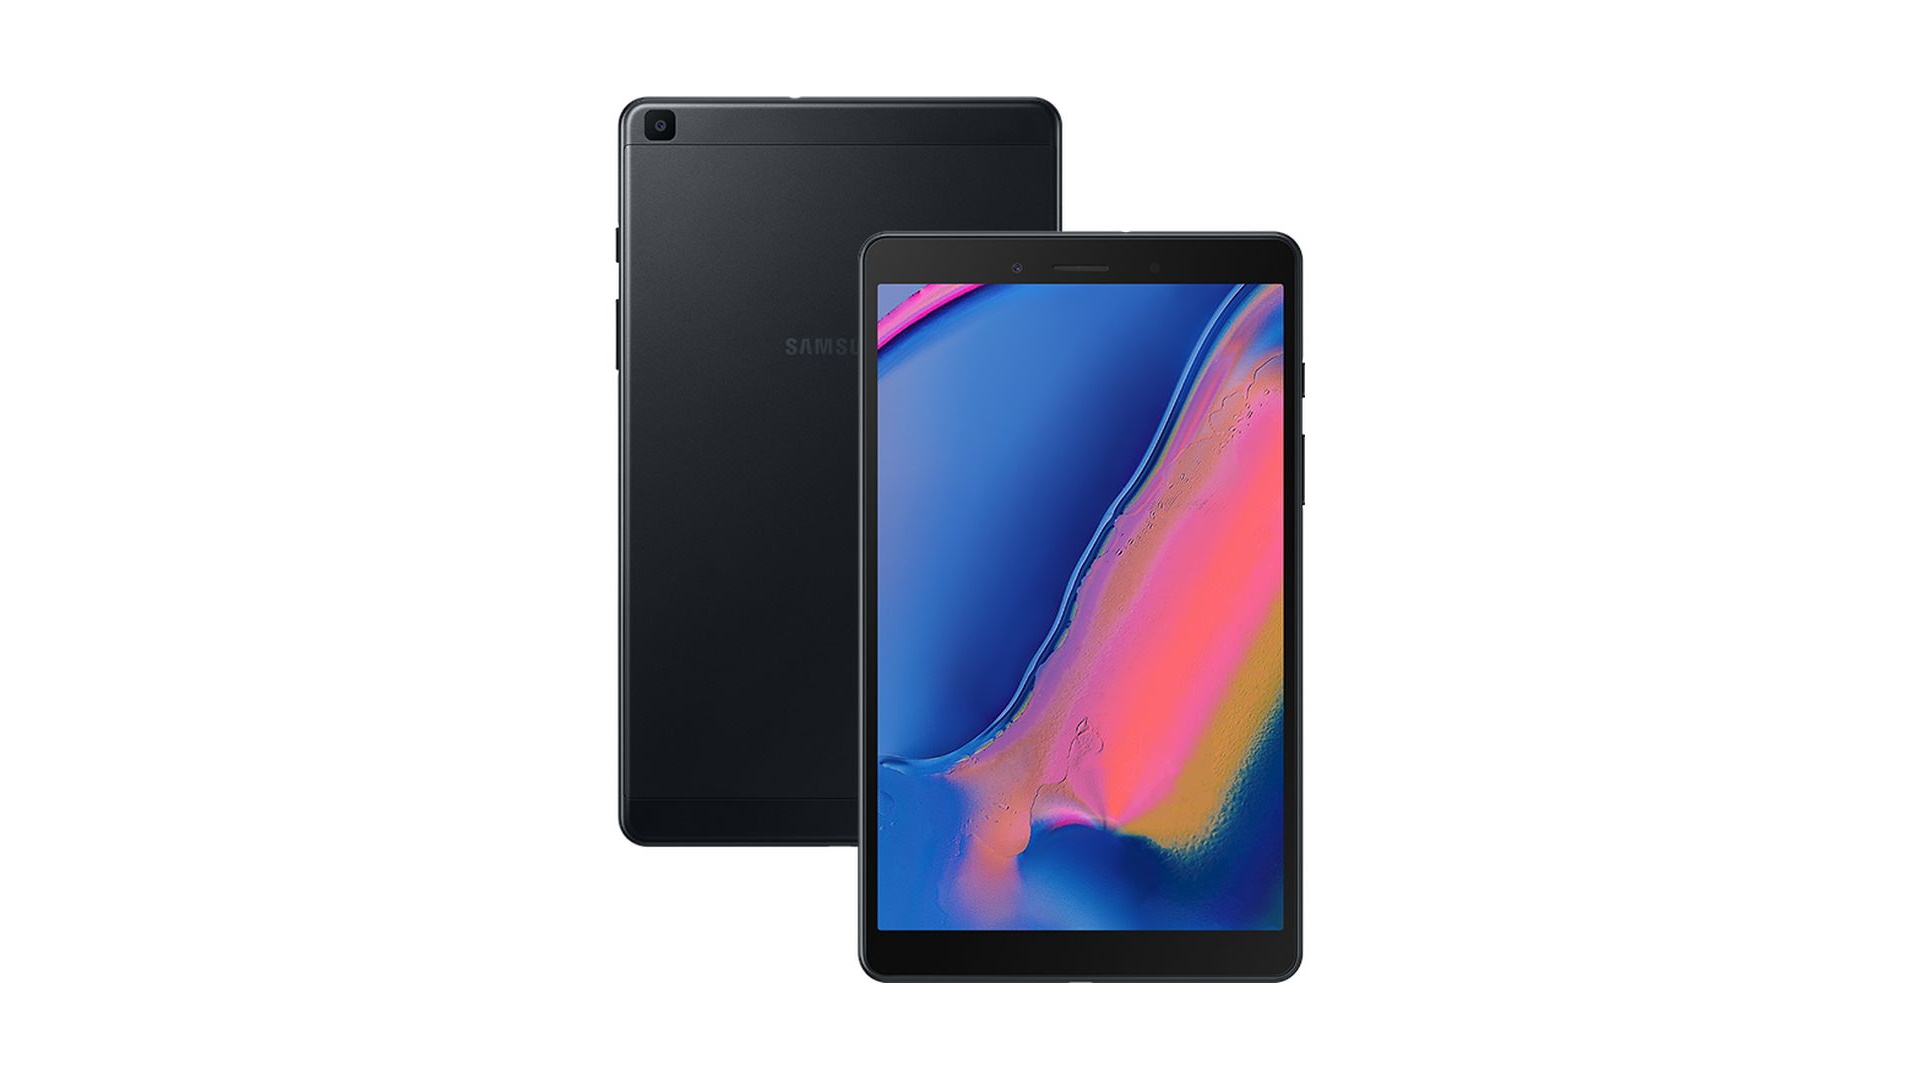 The best Samsung Galaxy Tab A prices and deals in May 2021